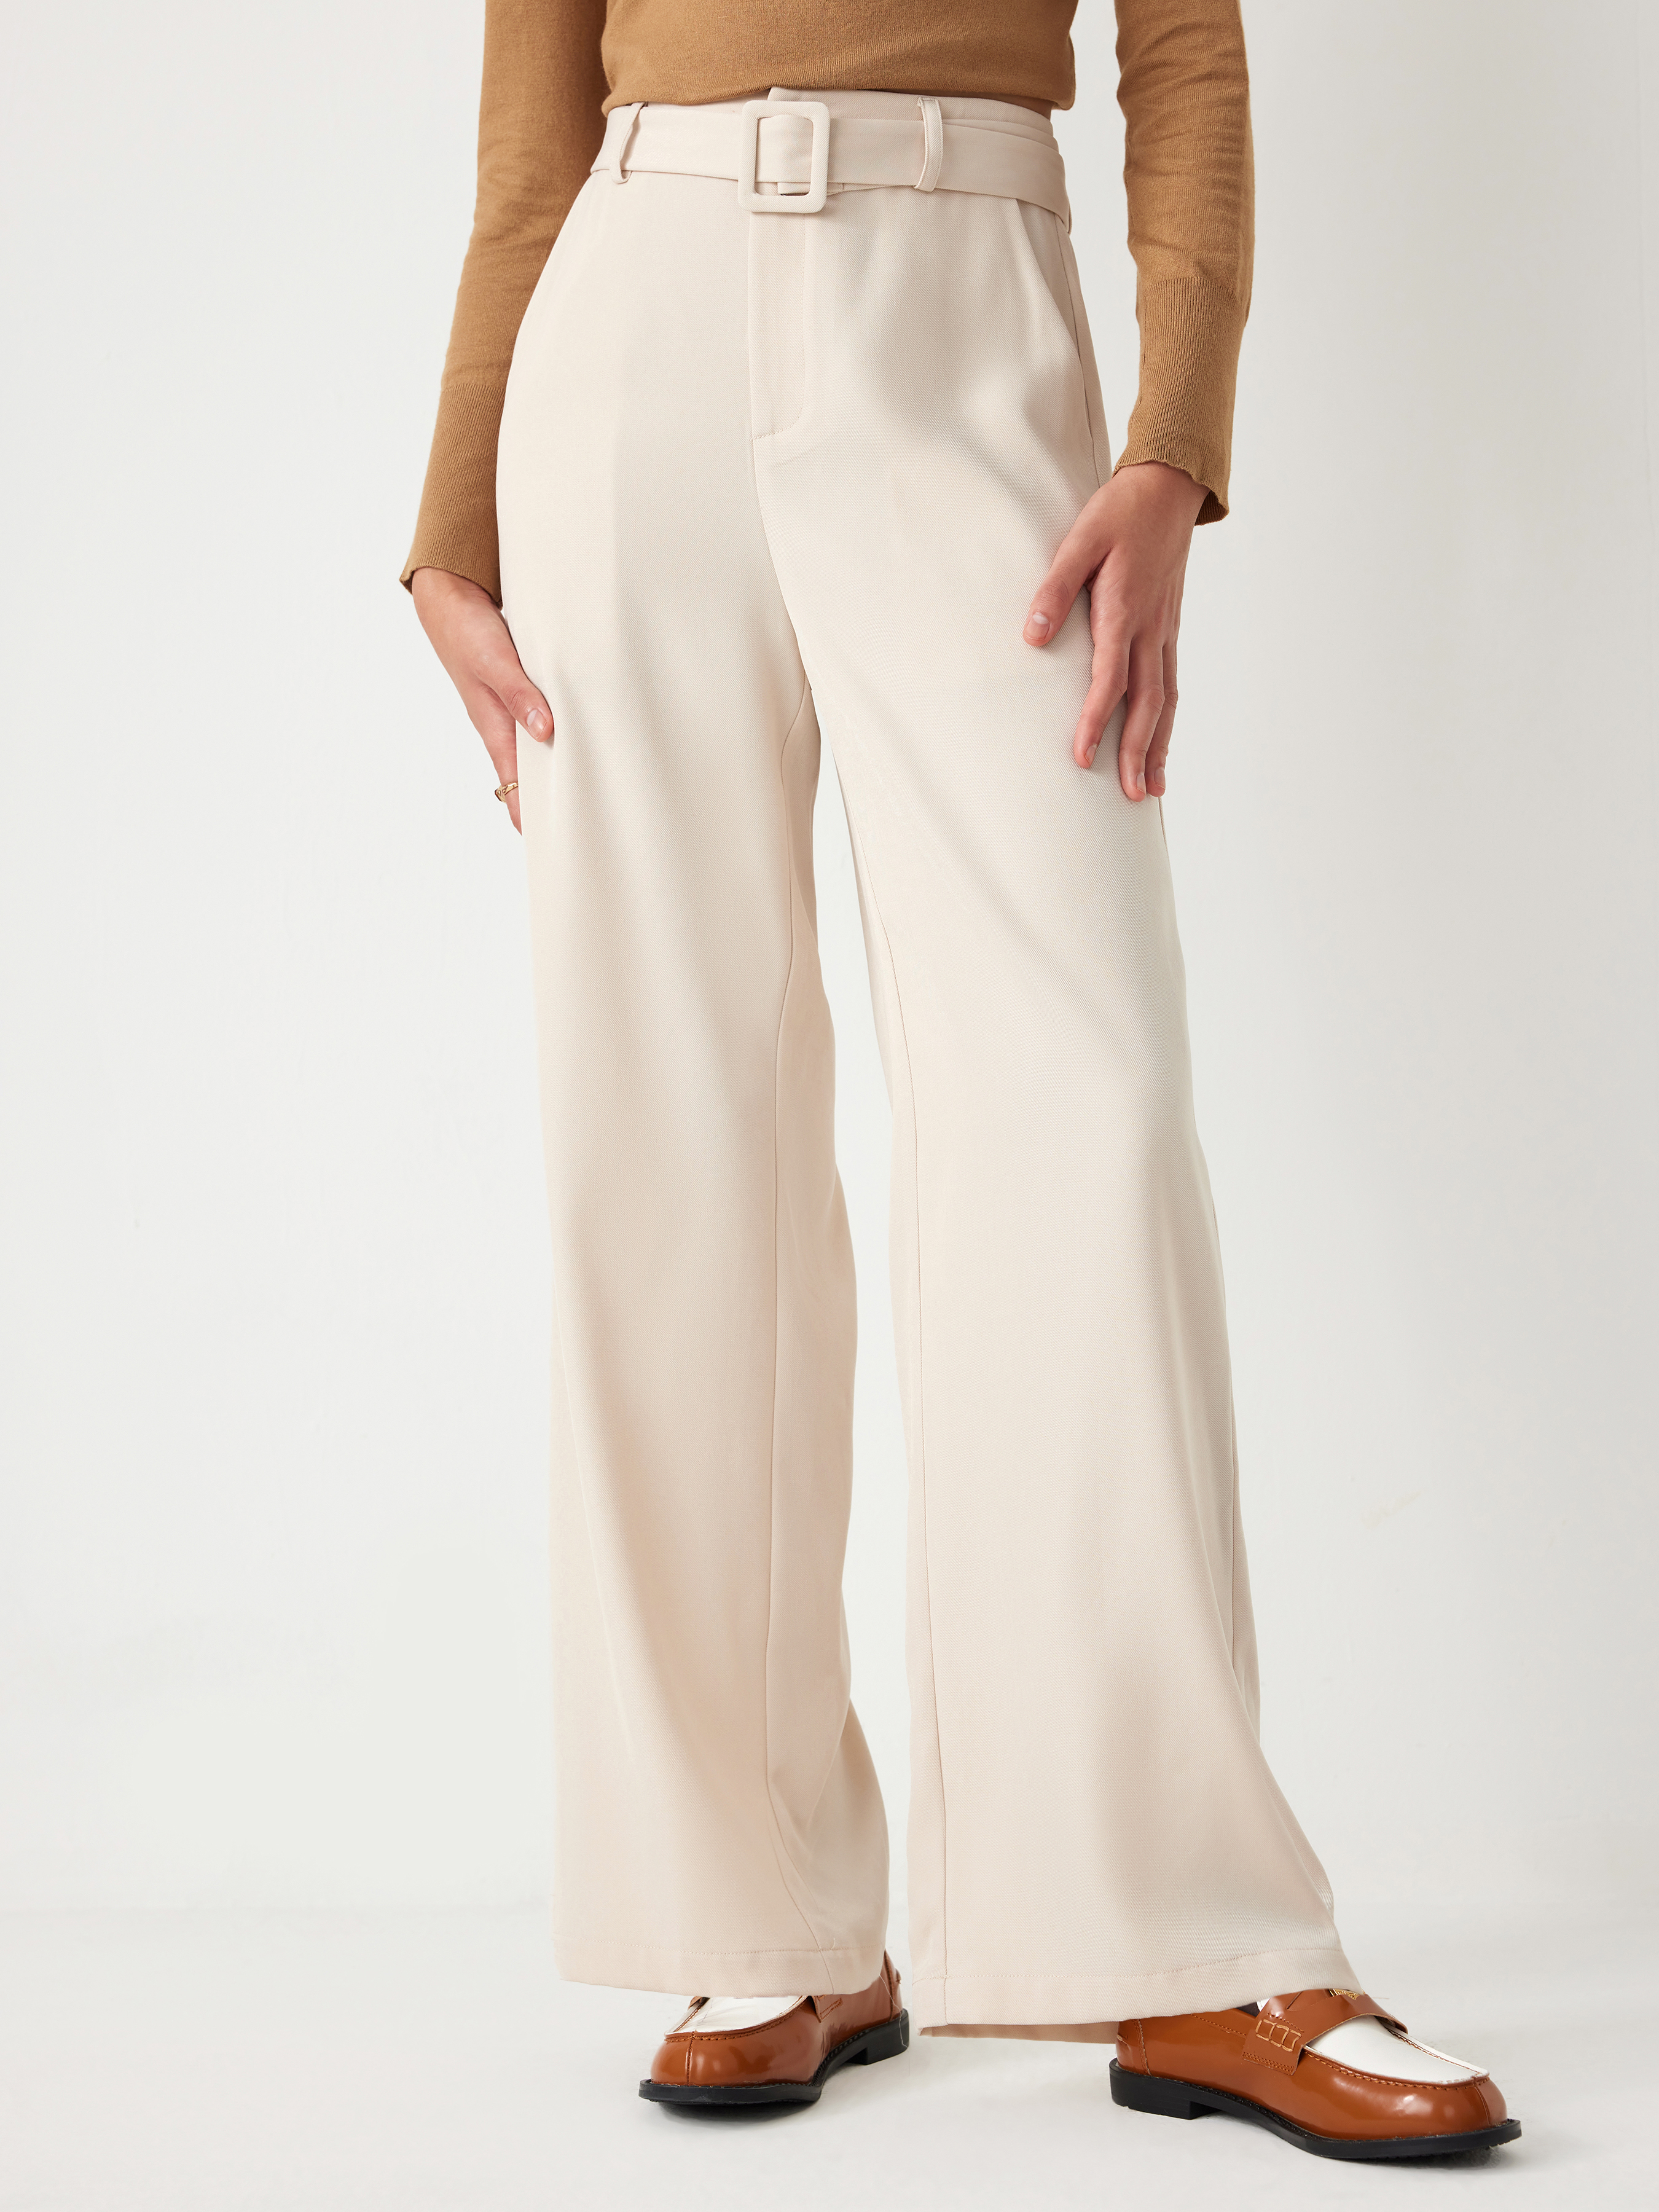 High Waist Solid Wide Leg Trousers With Belt For Daily Casual 